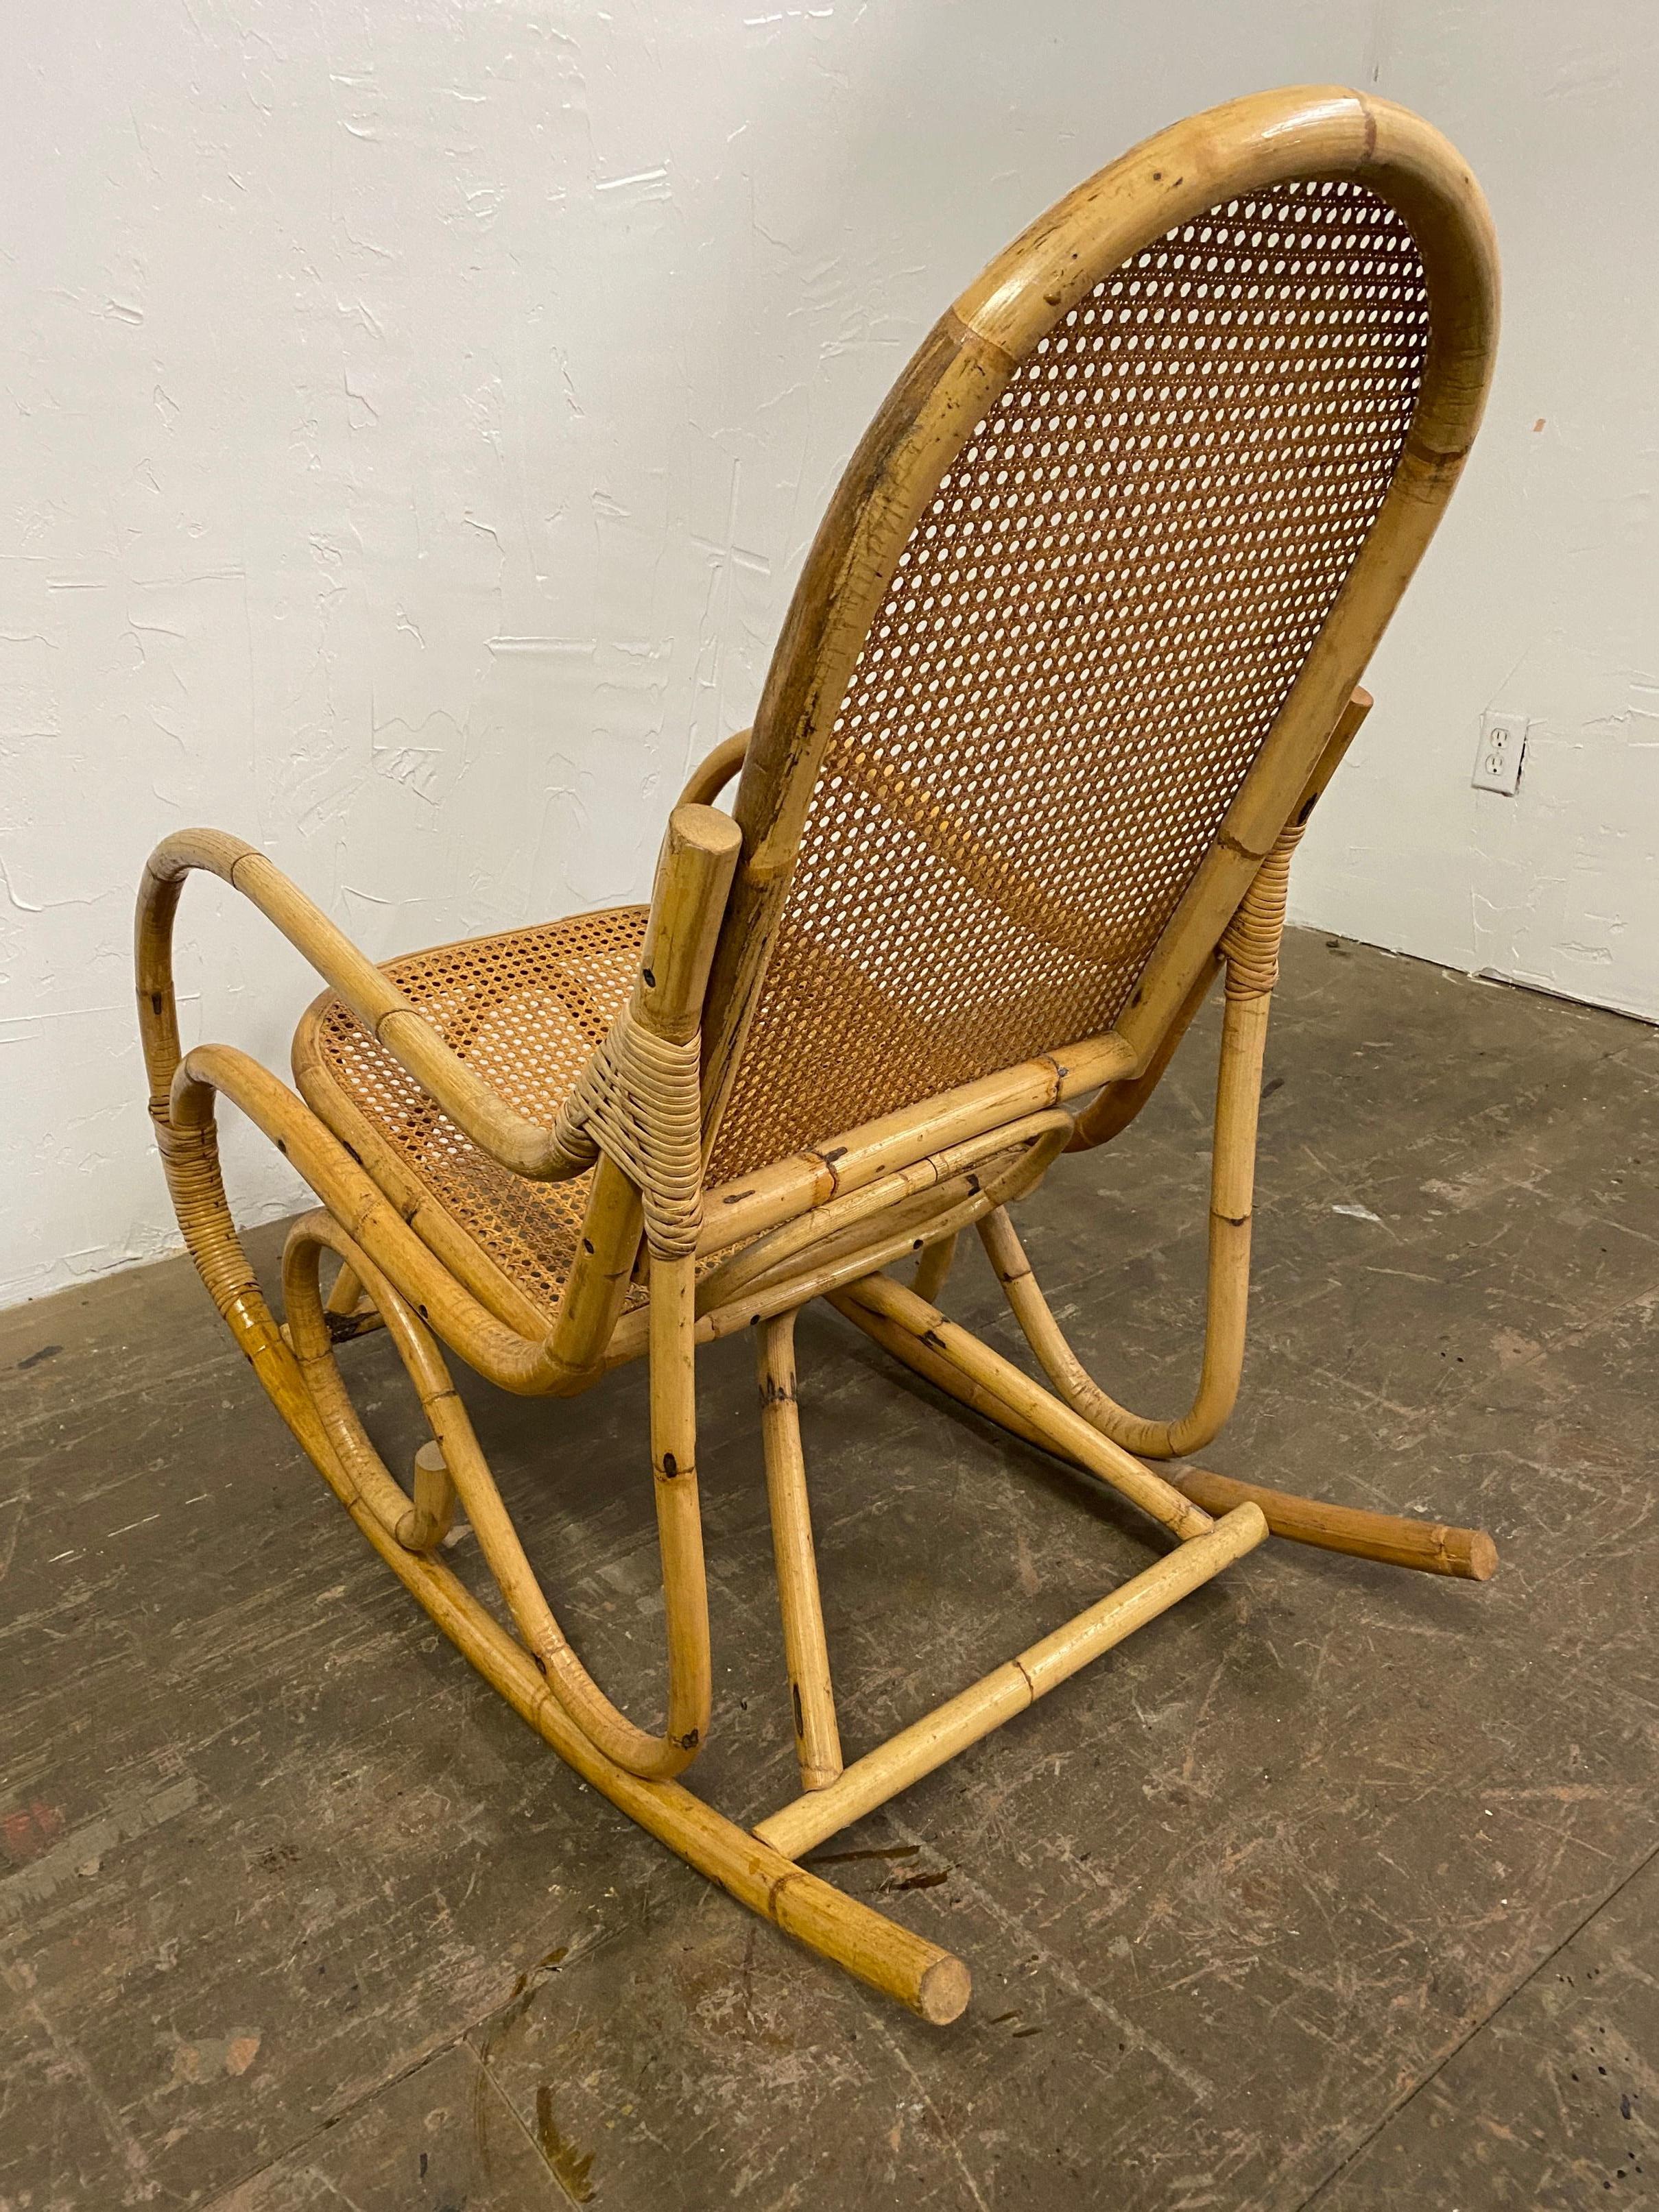 Great Art Deco Thonet style faux bamboo bentwood rocking chair with caned seat and back. A design classic that should not be missing in any home! Wonderful chair to add to any room for comfortable and relaxing seating.
Arm h = 23.5